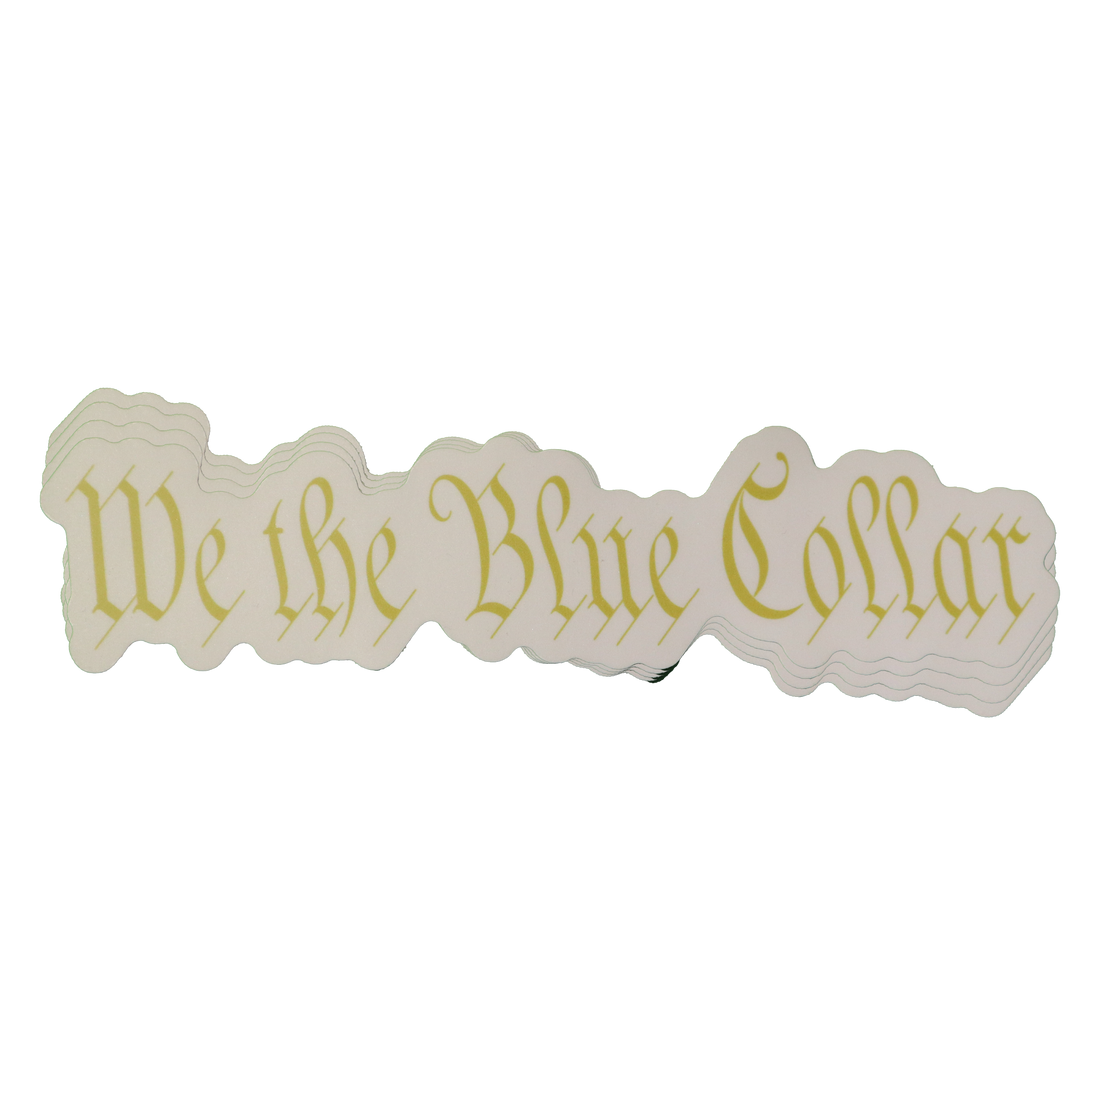 We the Blue Collar Decal